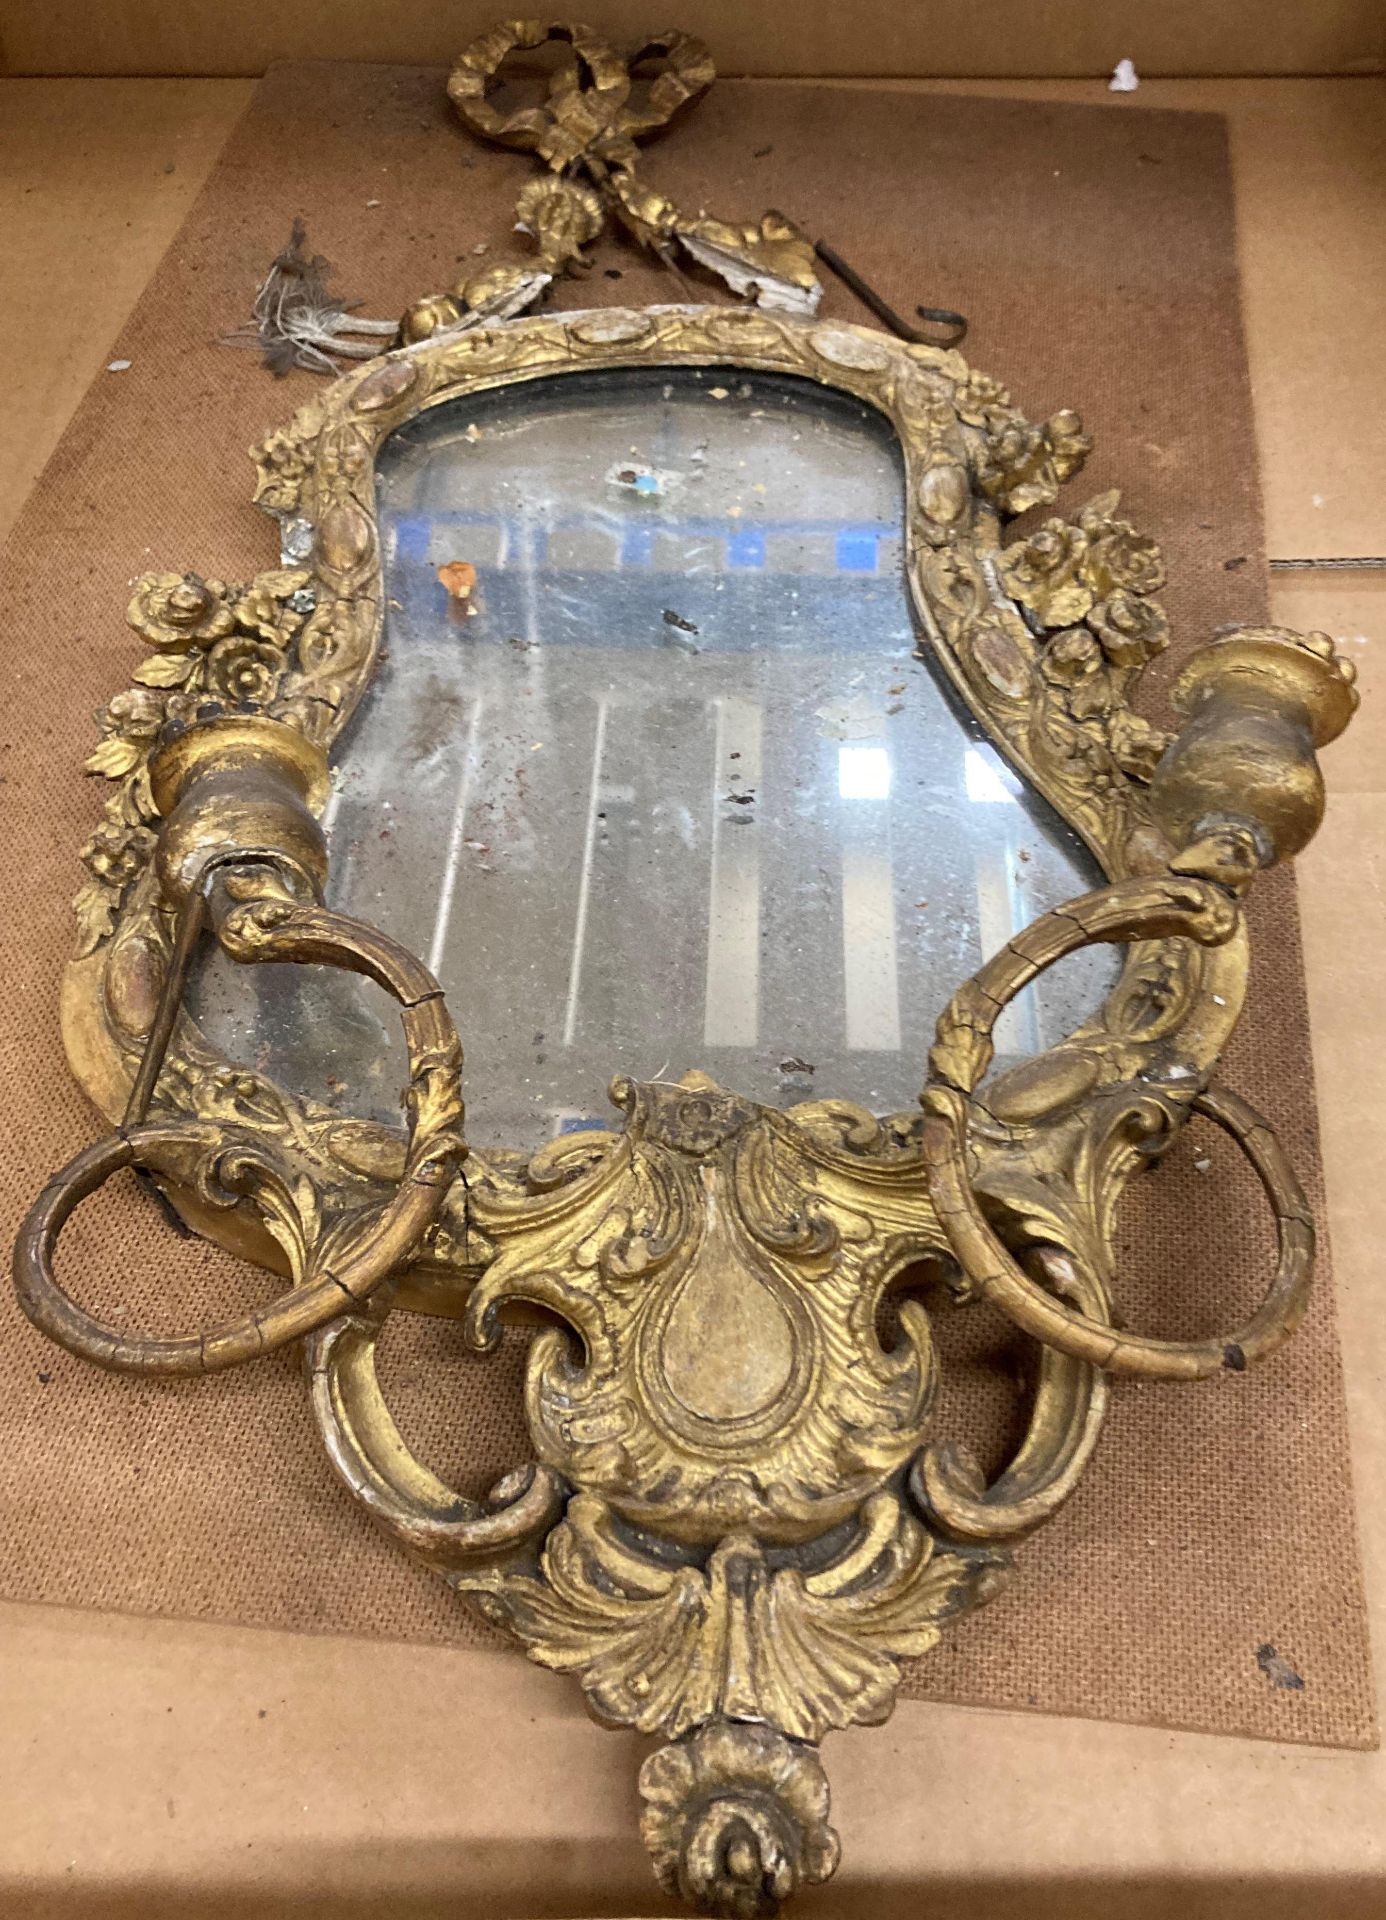 A 19th Century ornate gilt framed wall mirror - with damages - approximately 57cm x 34cm (sold as